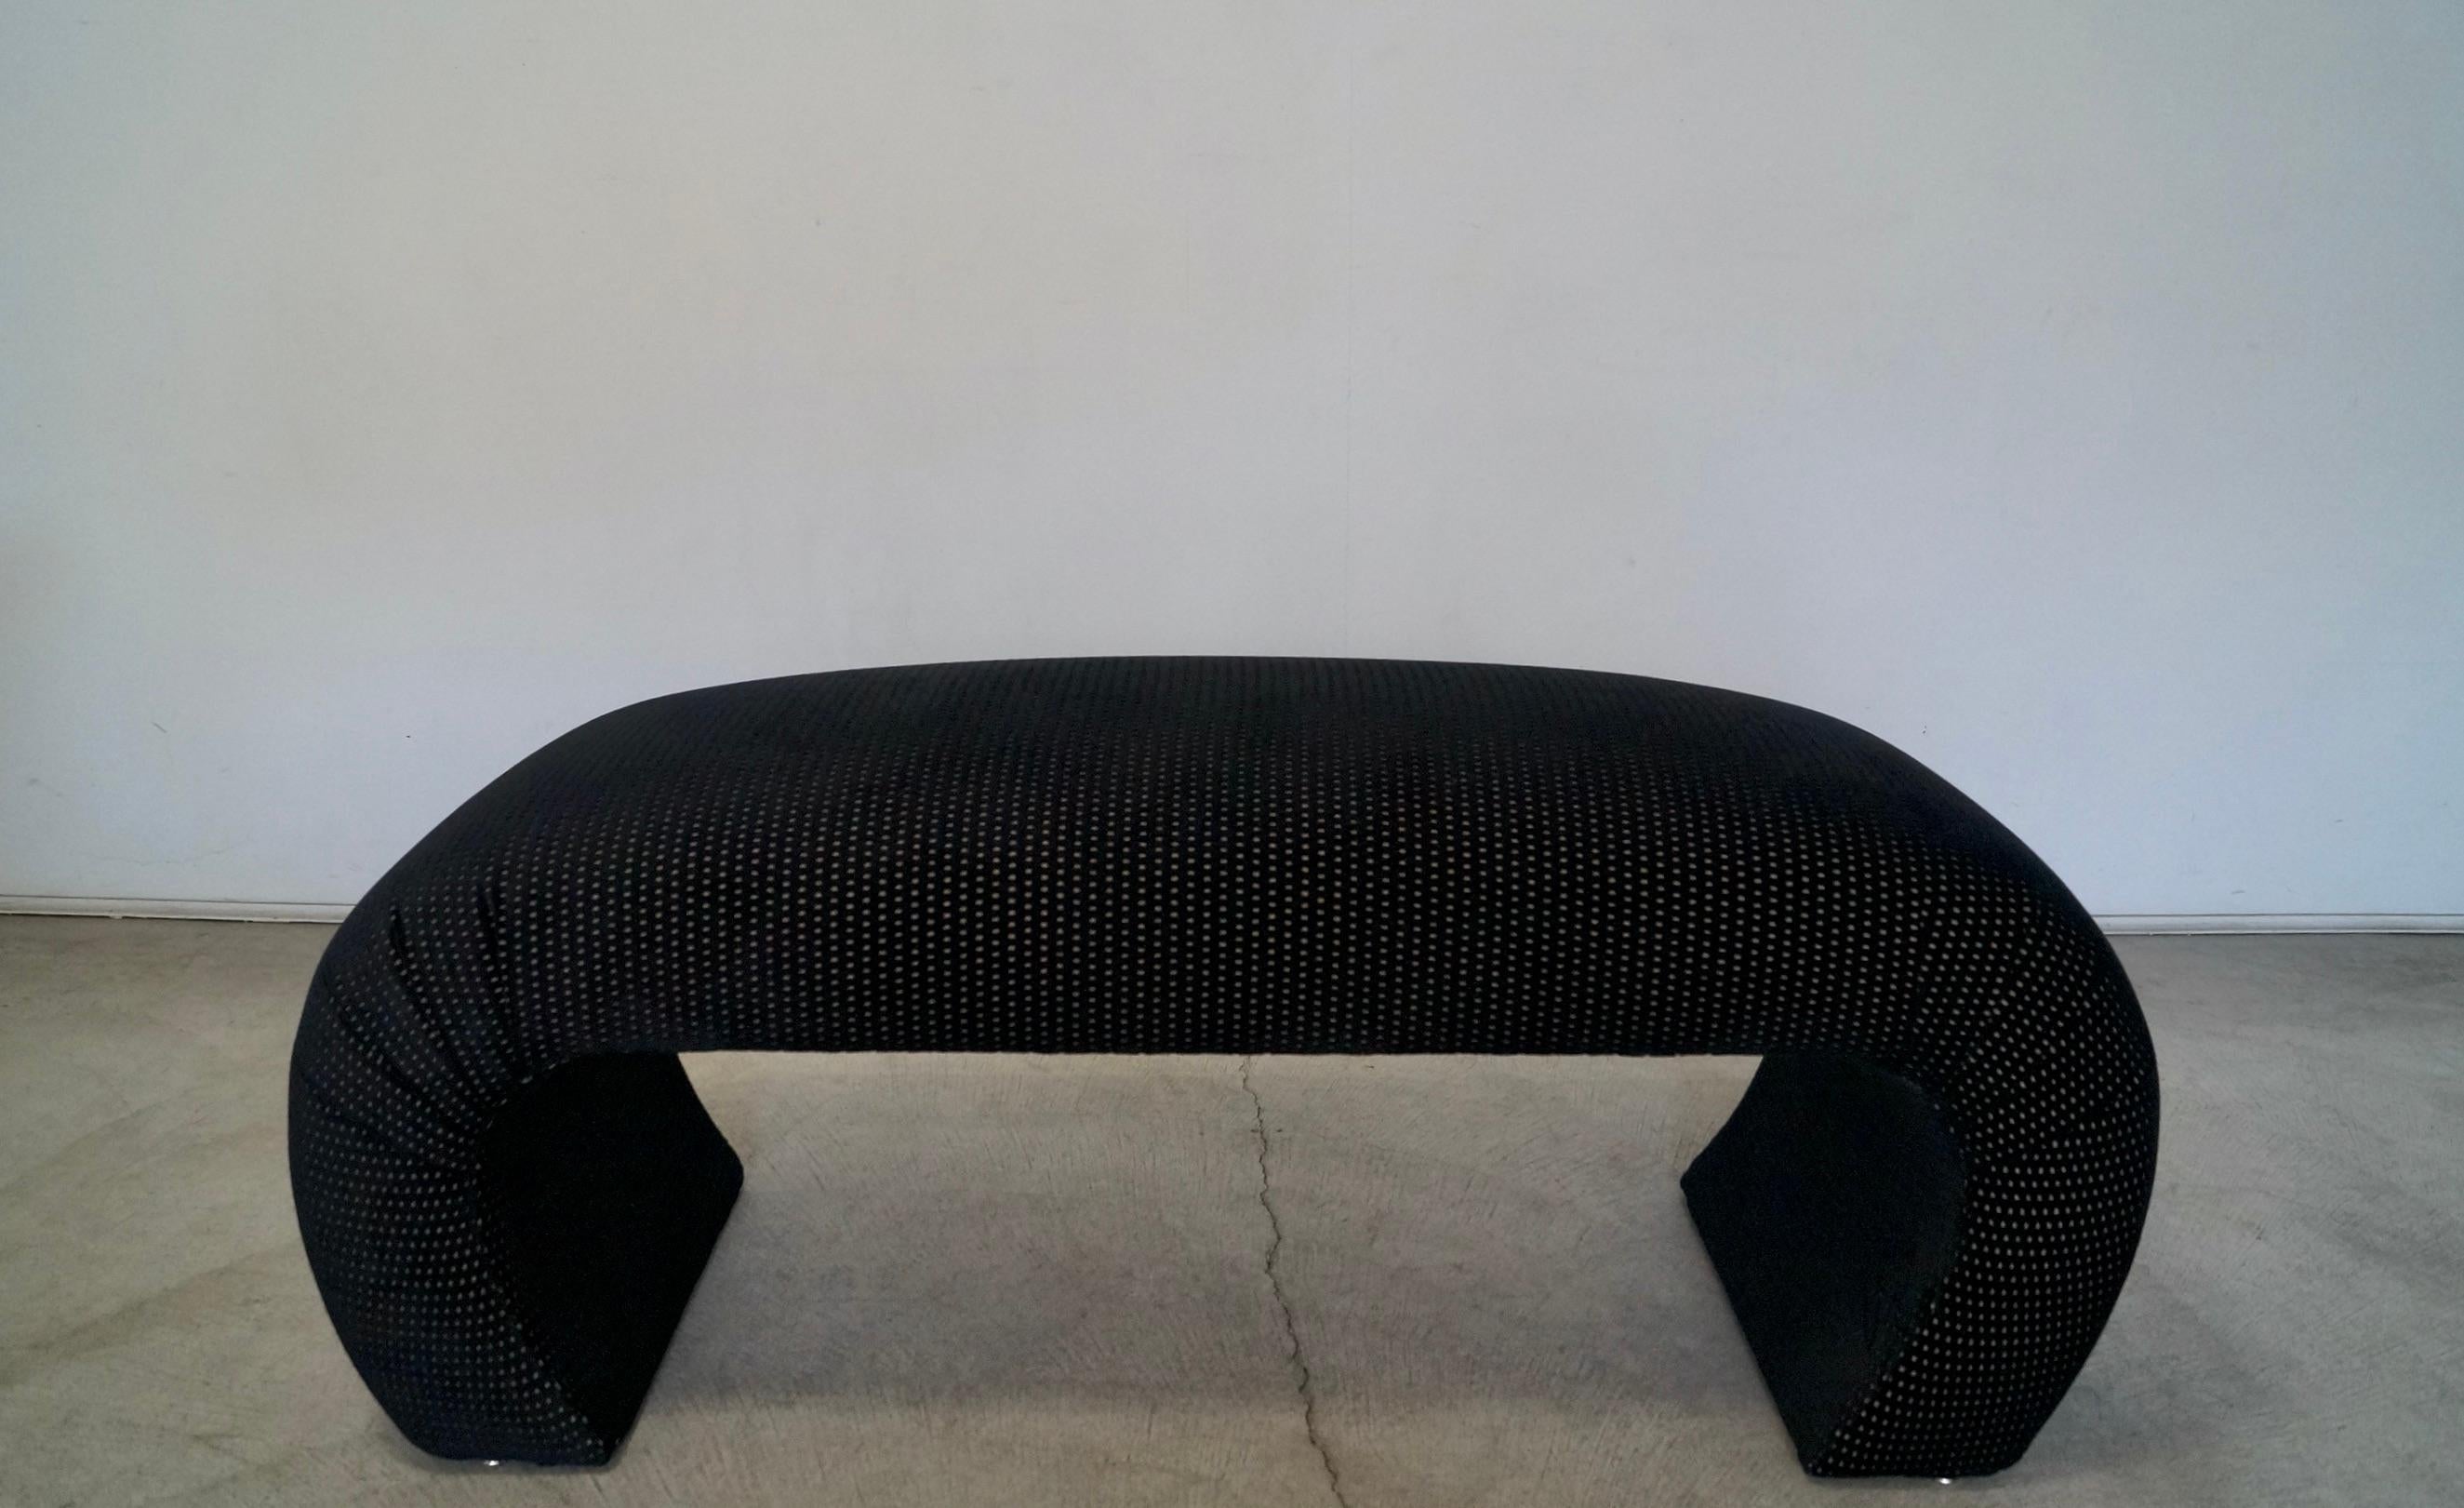 Vintage 1970s Hollywood Regency Post modern bench for sale. It's in the manner of Karl Springer, and has been professionally reupholstered in new velvet and foam. The velvet is special and is raised velvet with a gold backdrop pattern. It's a solid